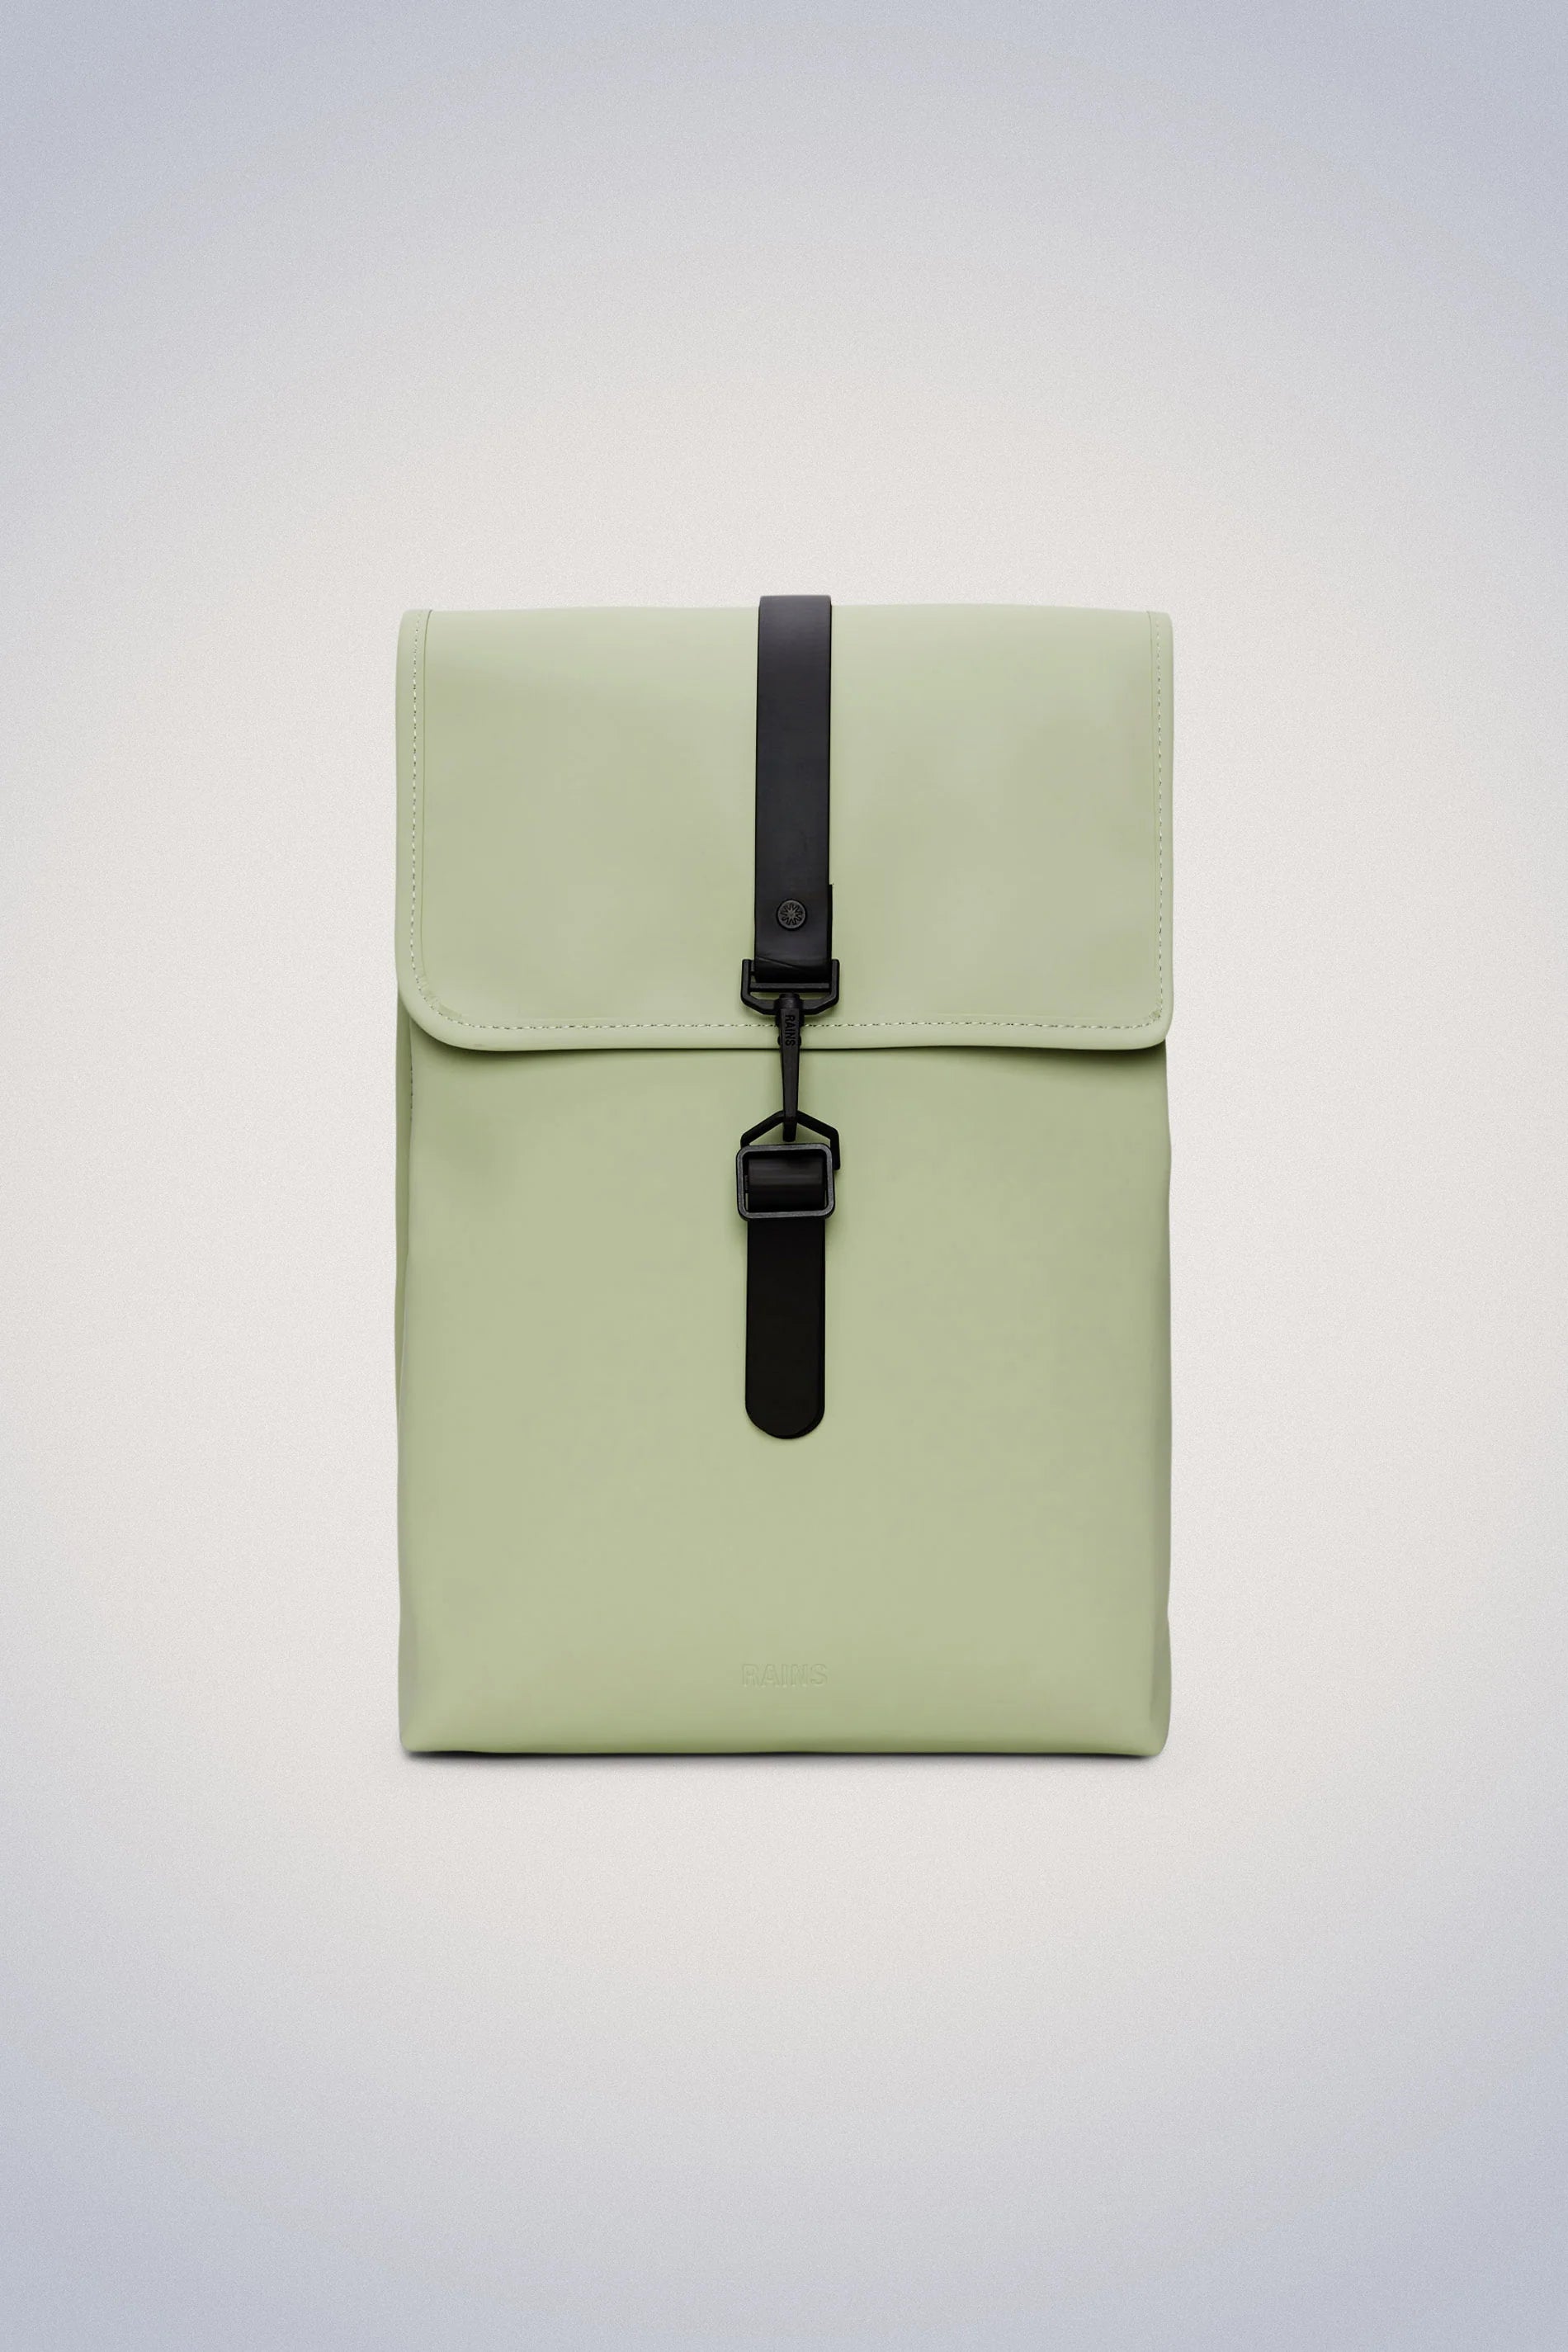 The Rains Rucksack is a small green backpack with black straps. This stylish Rains rucksack is made with durable waterproof fabric, making it perfect for daily commutes or weekend adventures.